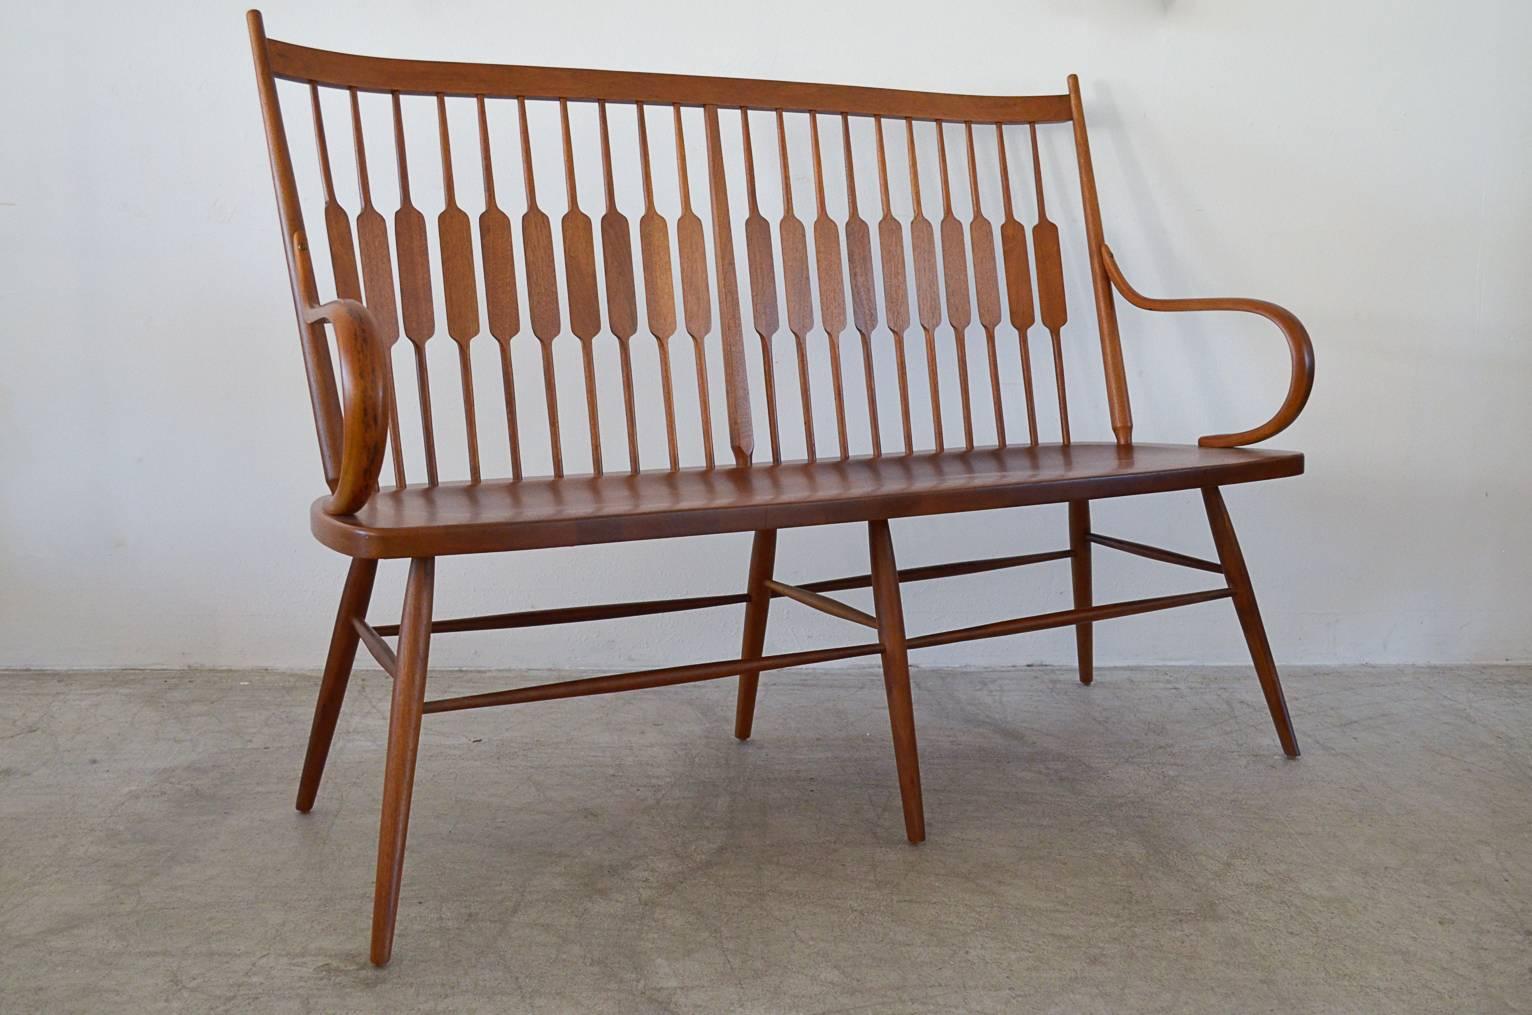 Walnut shaker style bench by Kipp Stewart and Stuart McDougall for Drexel Declaration.

Rare, difficult to find and fully restored in showroom perfect condition. Works well in an entry, hall way, patio or as additional seating for your dining